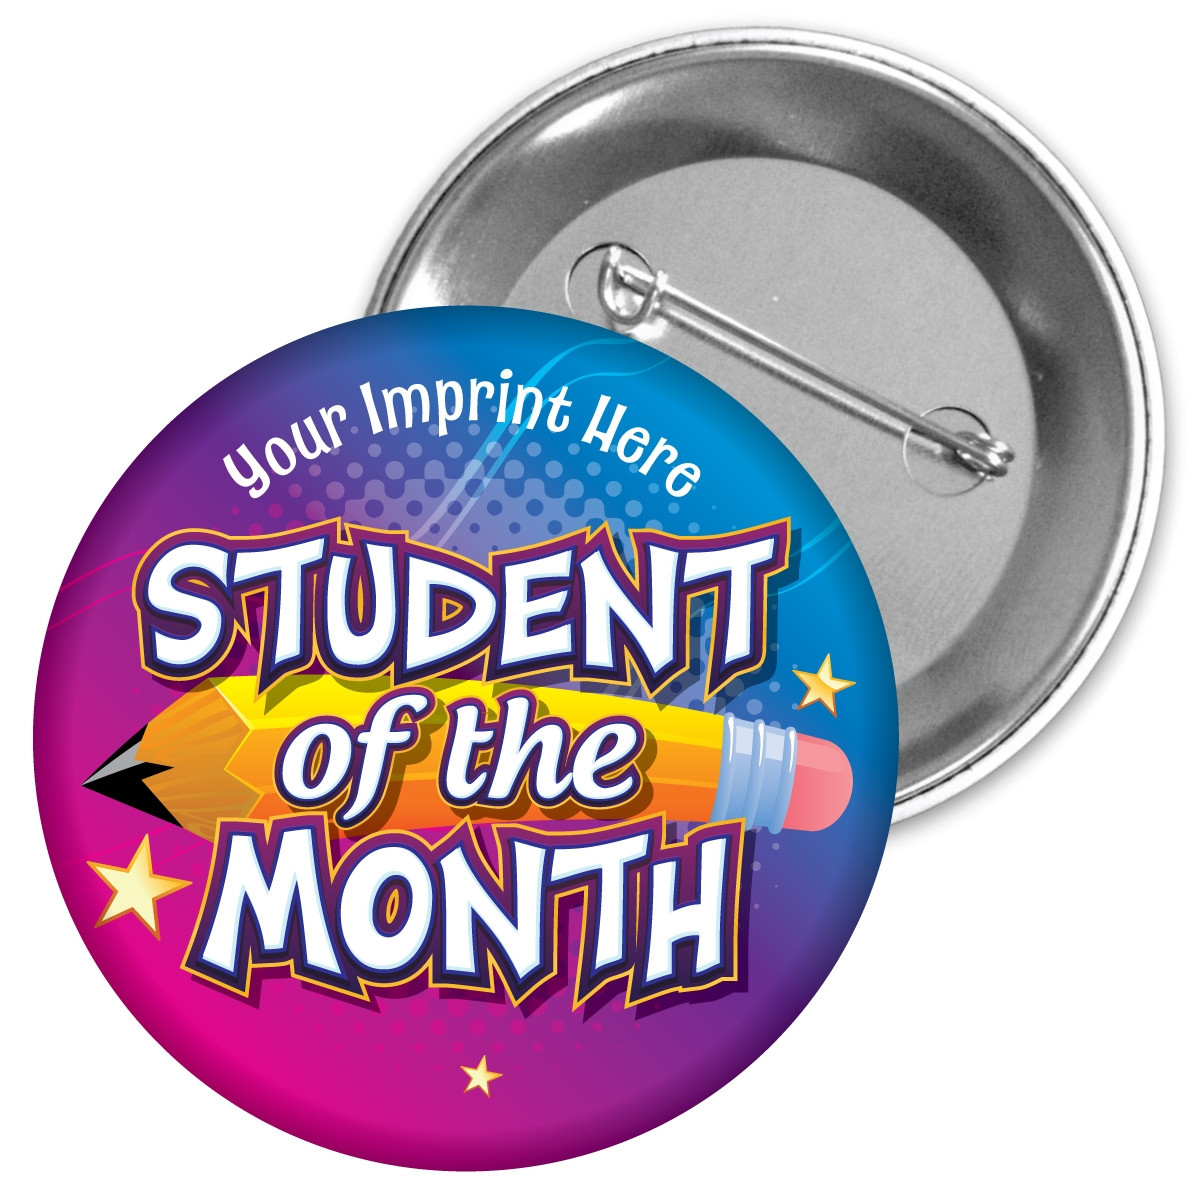 Custom Metal Button - Student of the Month (Pencil)